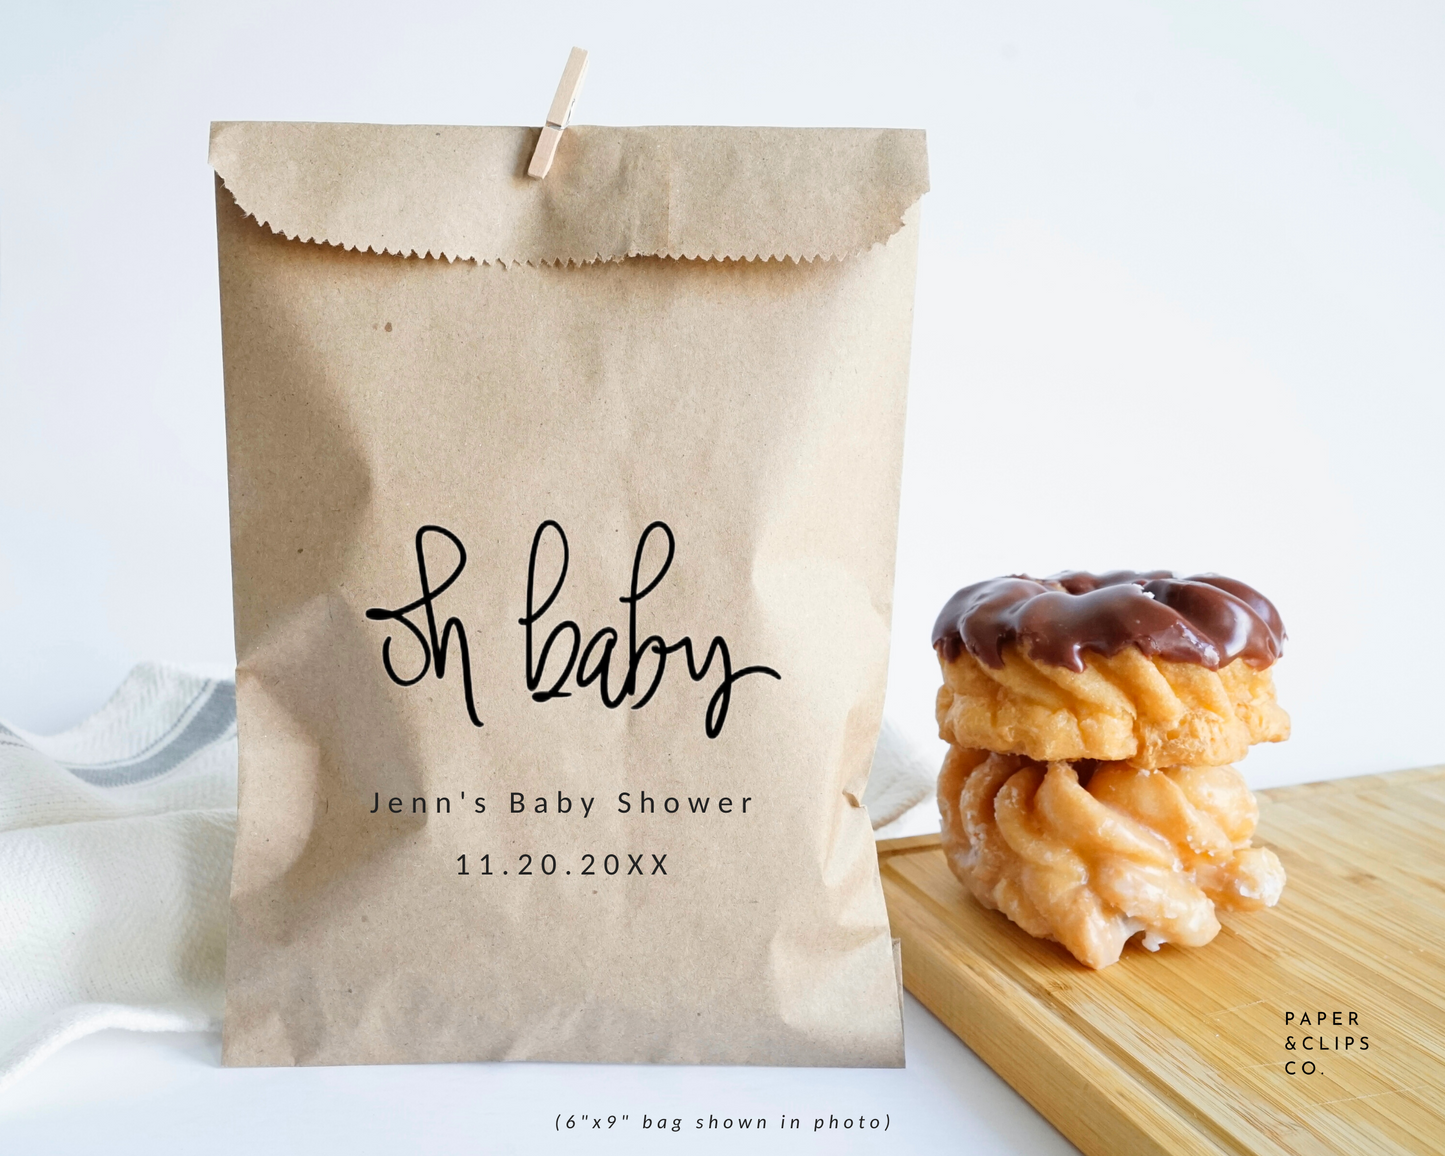 Oh Baby - Brown Party Bags